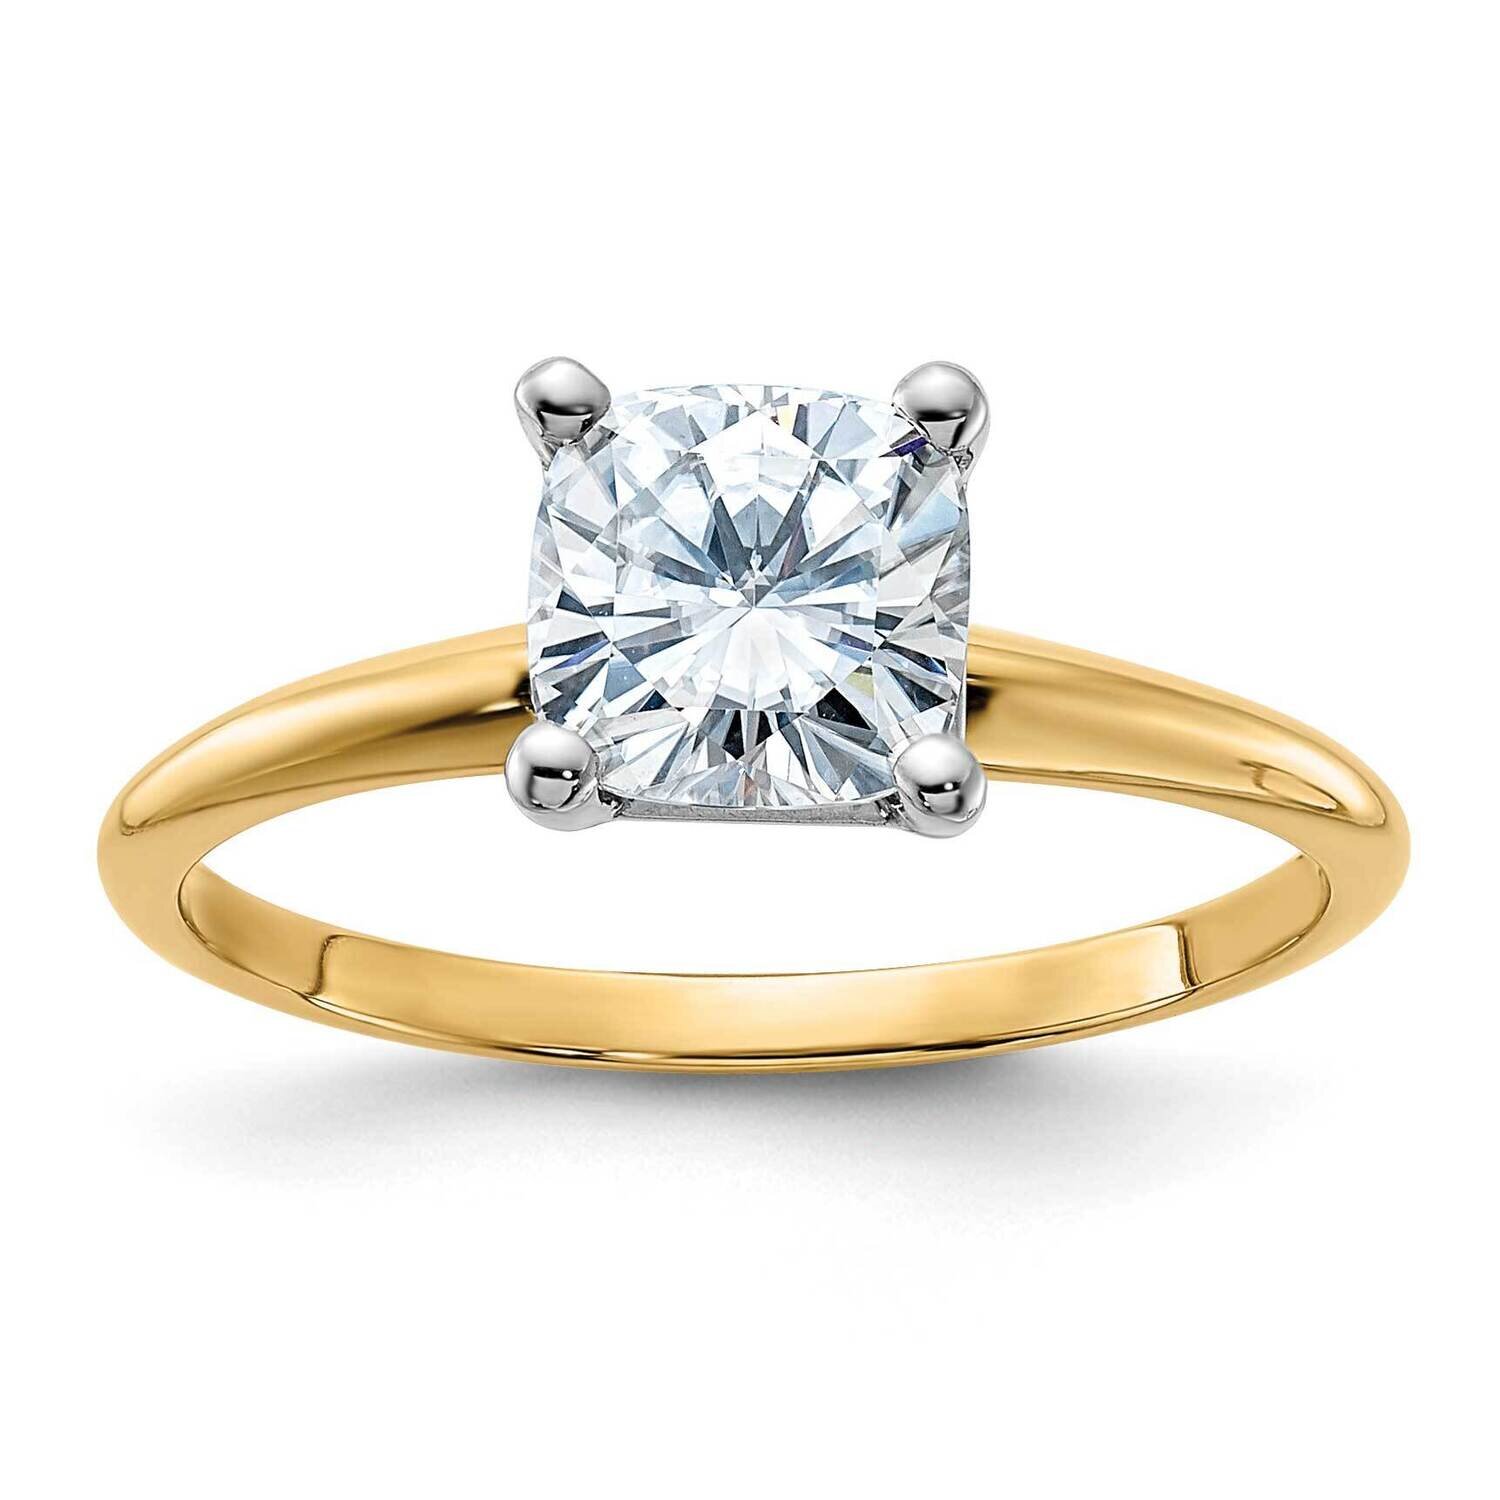 1 1/3ct. D E F Pure Light Cushion Moissanite Solitaire Ring 14k Gold YGSH15C-13MP